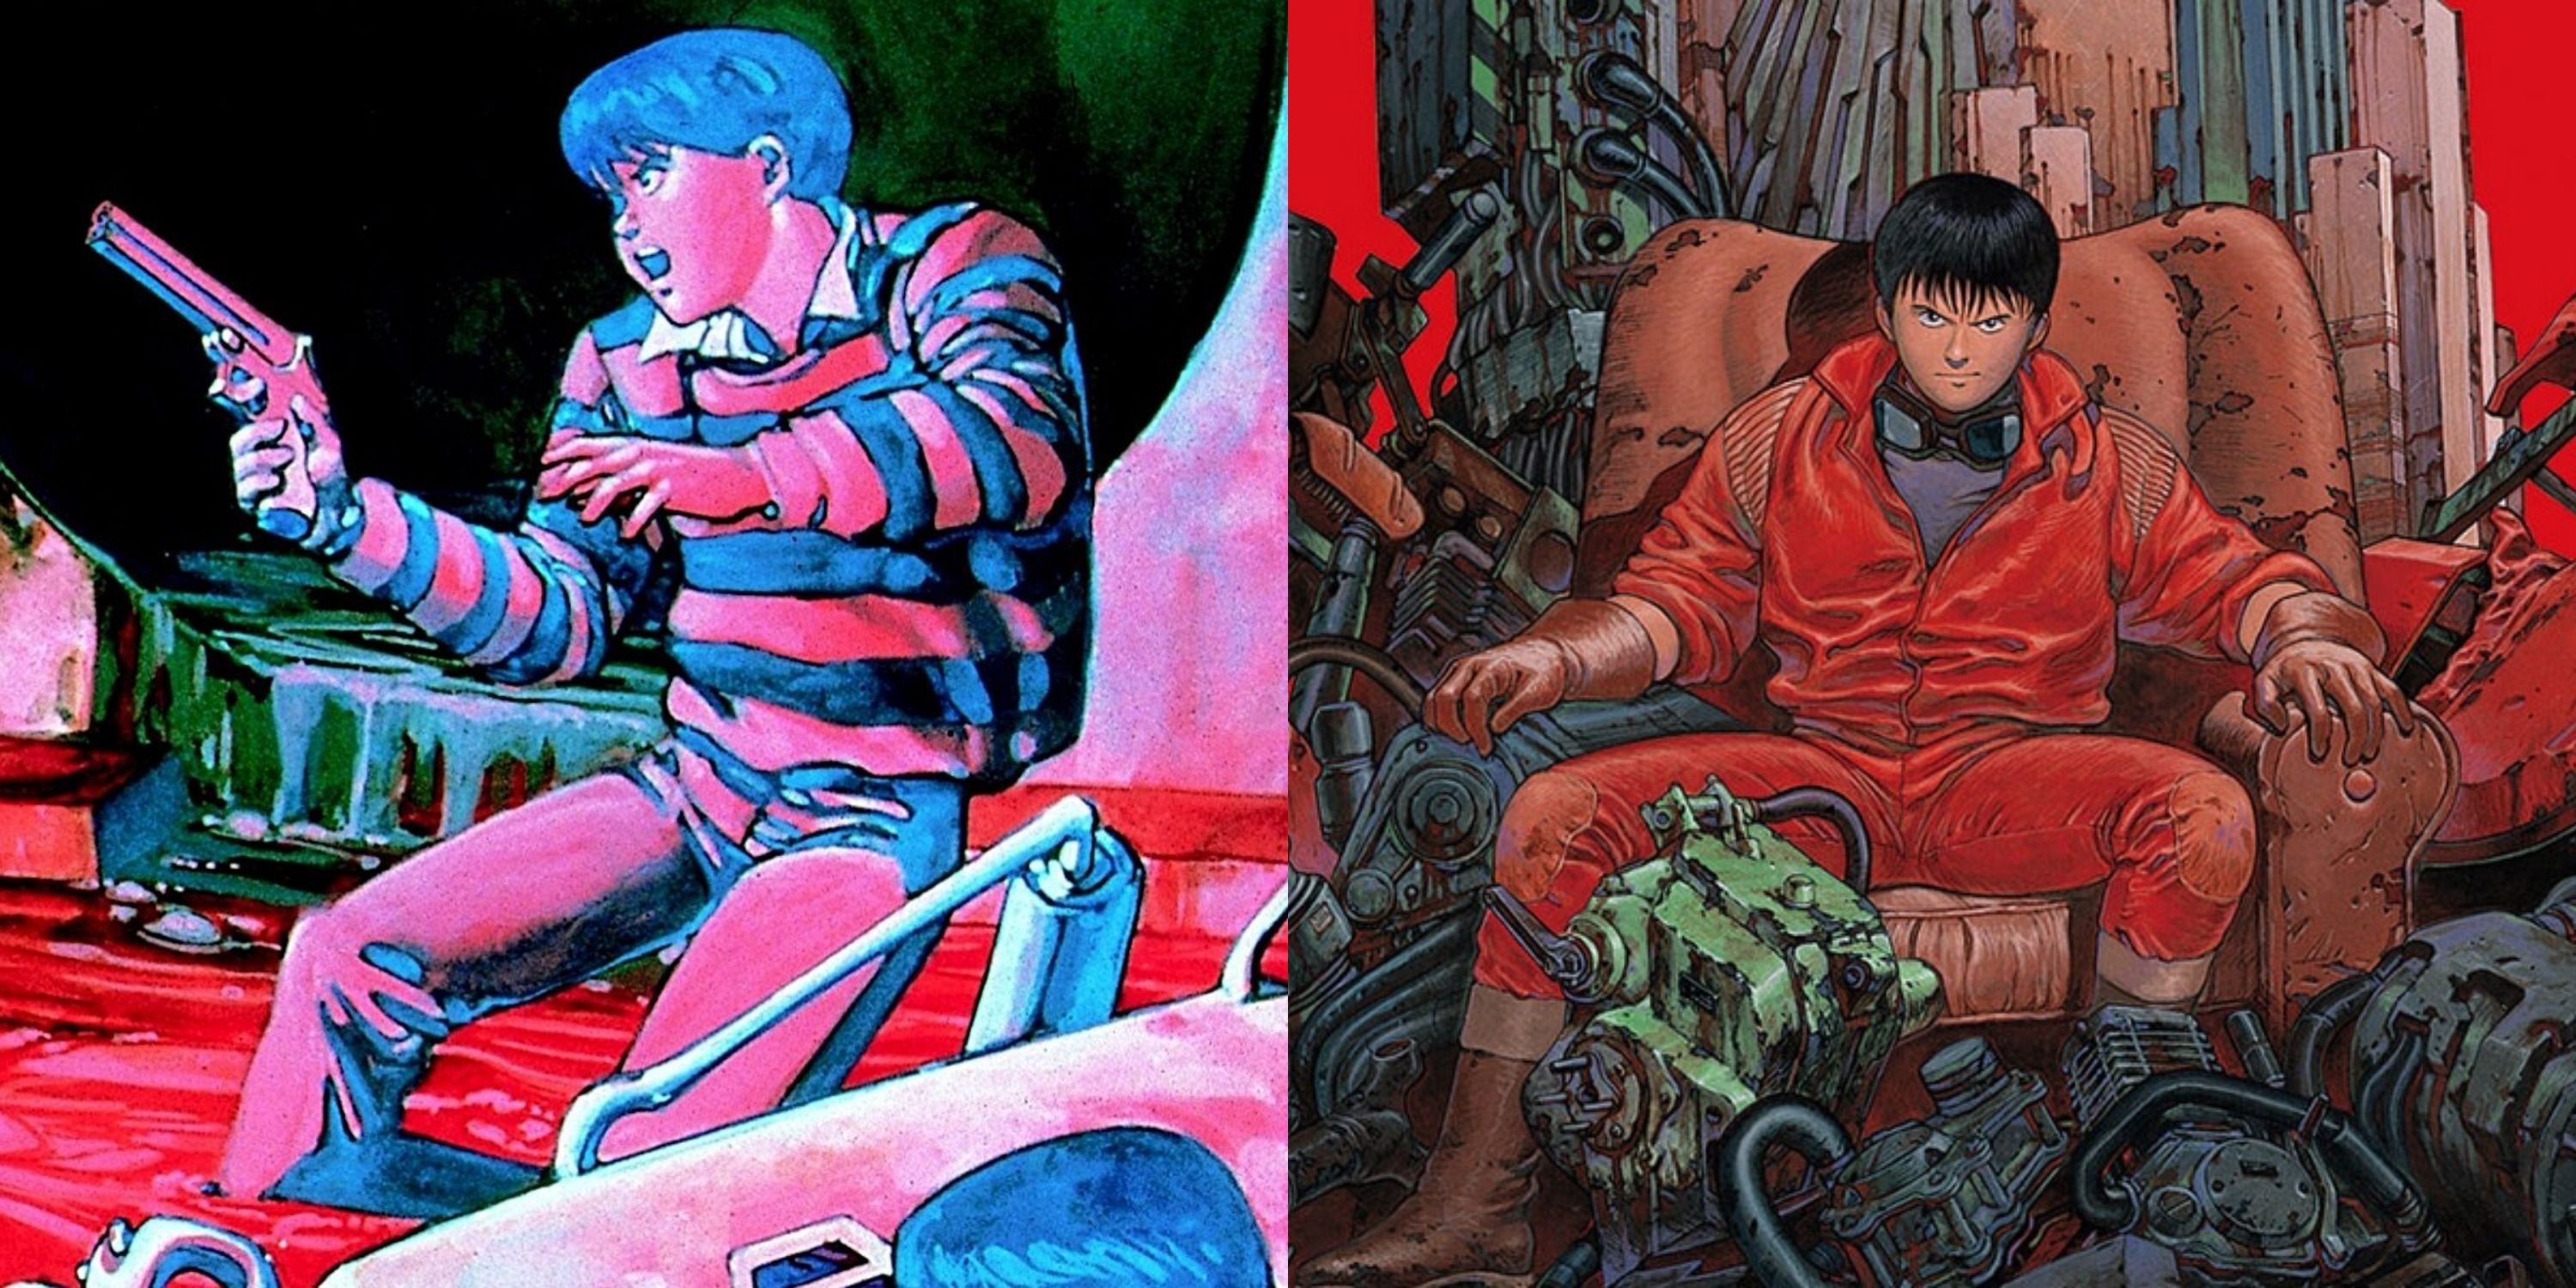 Featured image Kaneda in the manga and on promotional artwork for the movie Akira